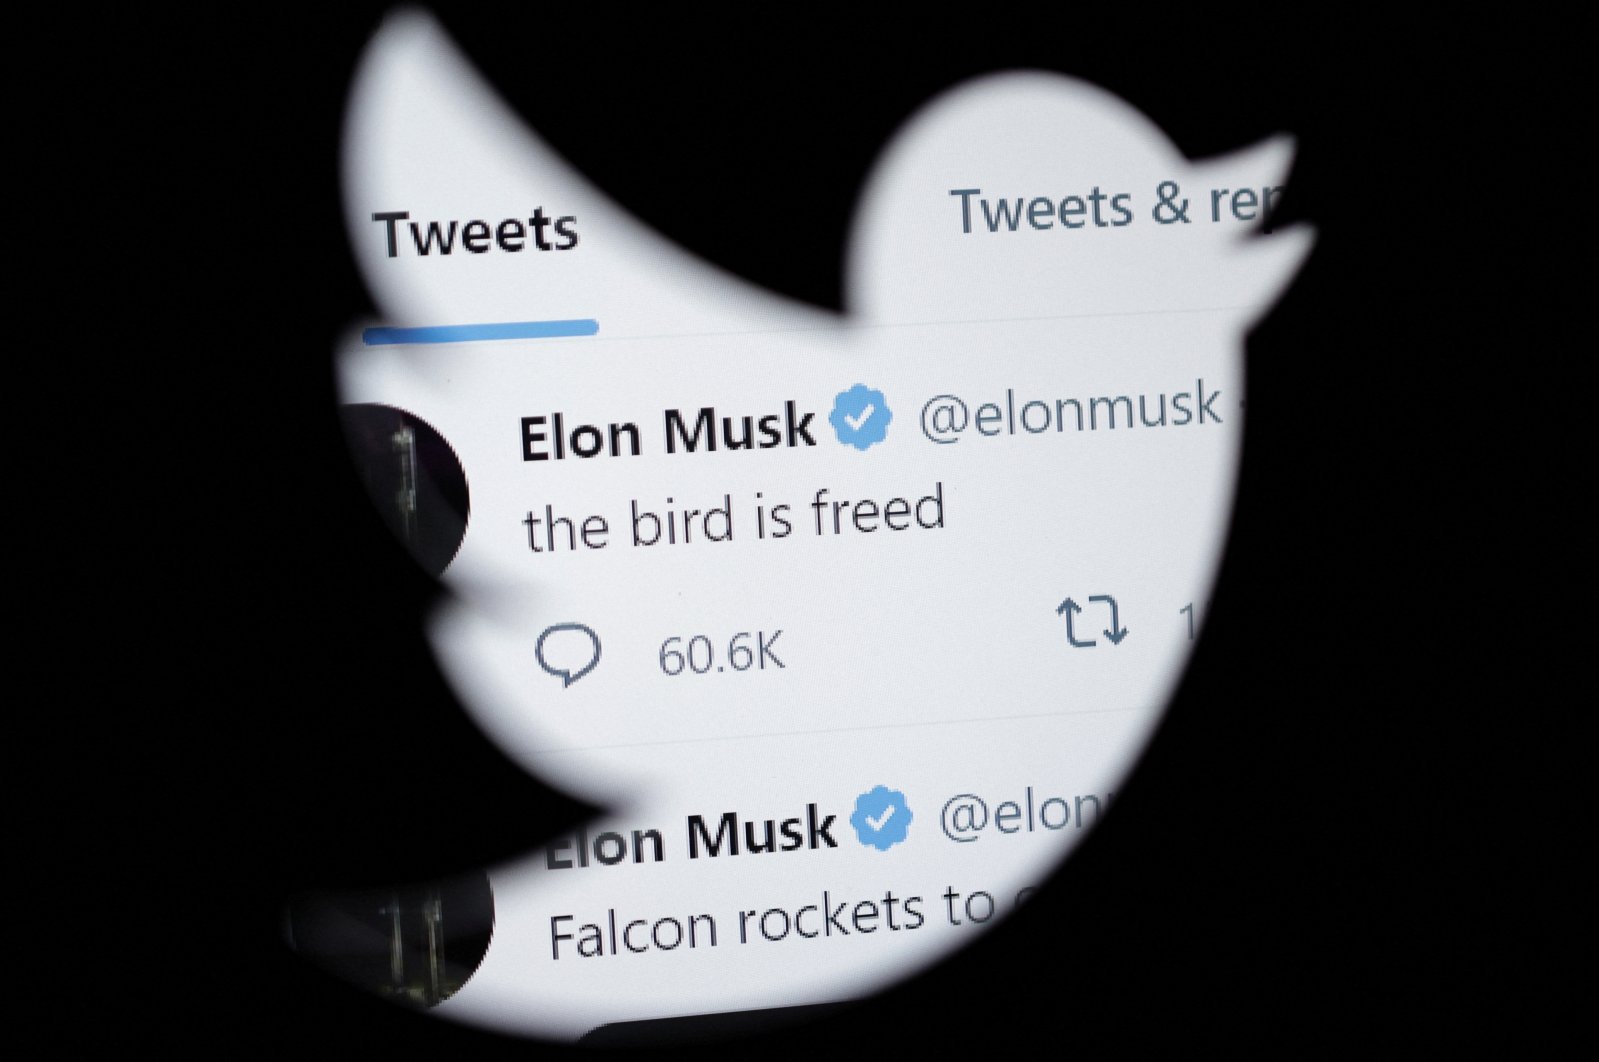 Elon Musk&#039;s tweet reading &quot;The bird is freed&quot; is seen through a Twitter logo in this illustration taken on Oct. 28, 2022. (Reuters Photo)